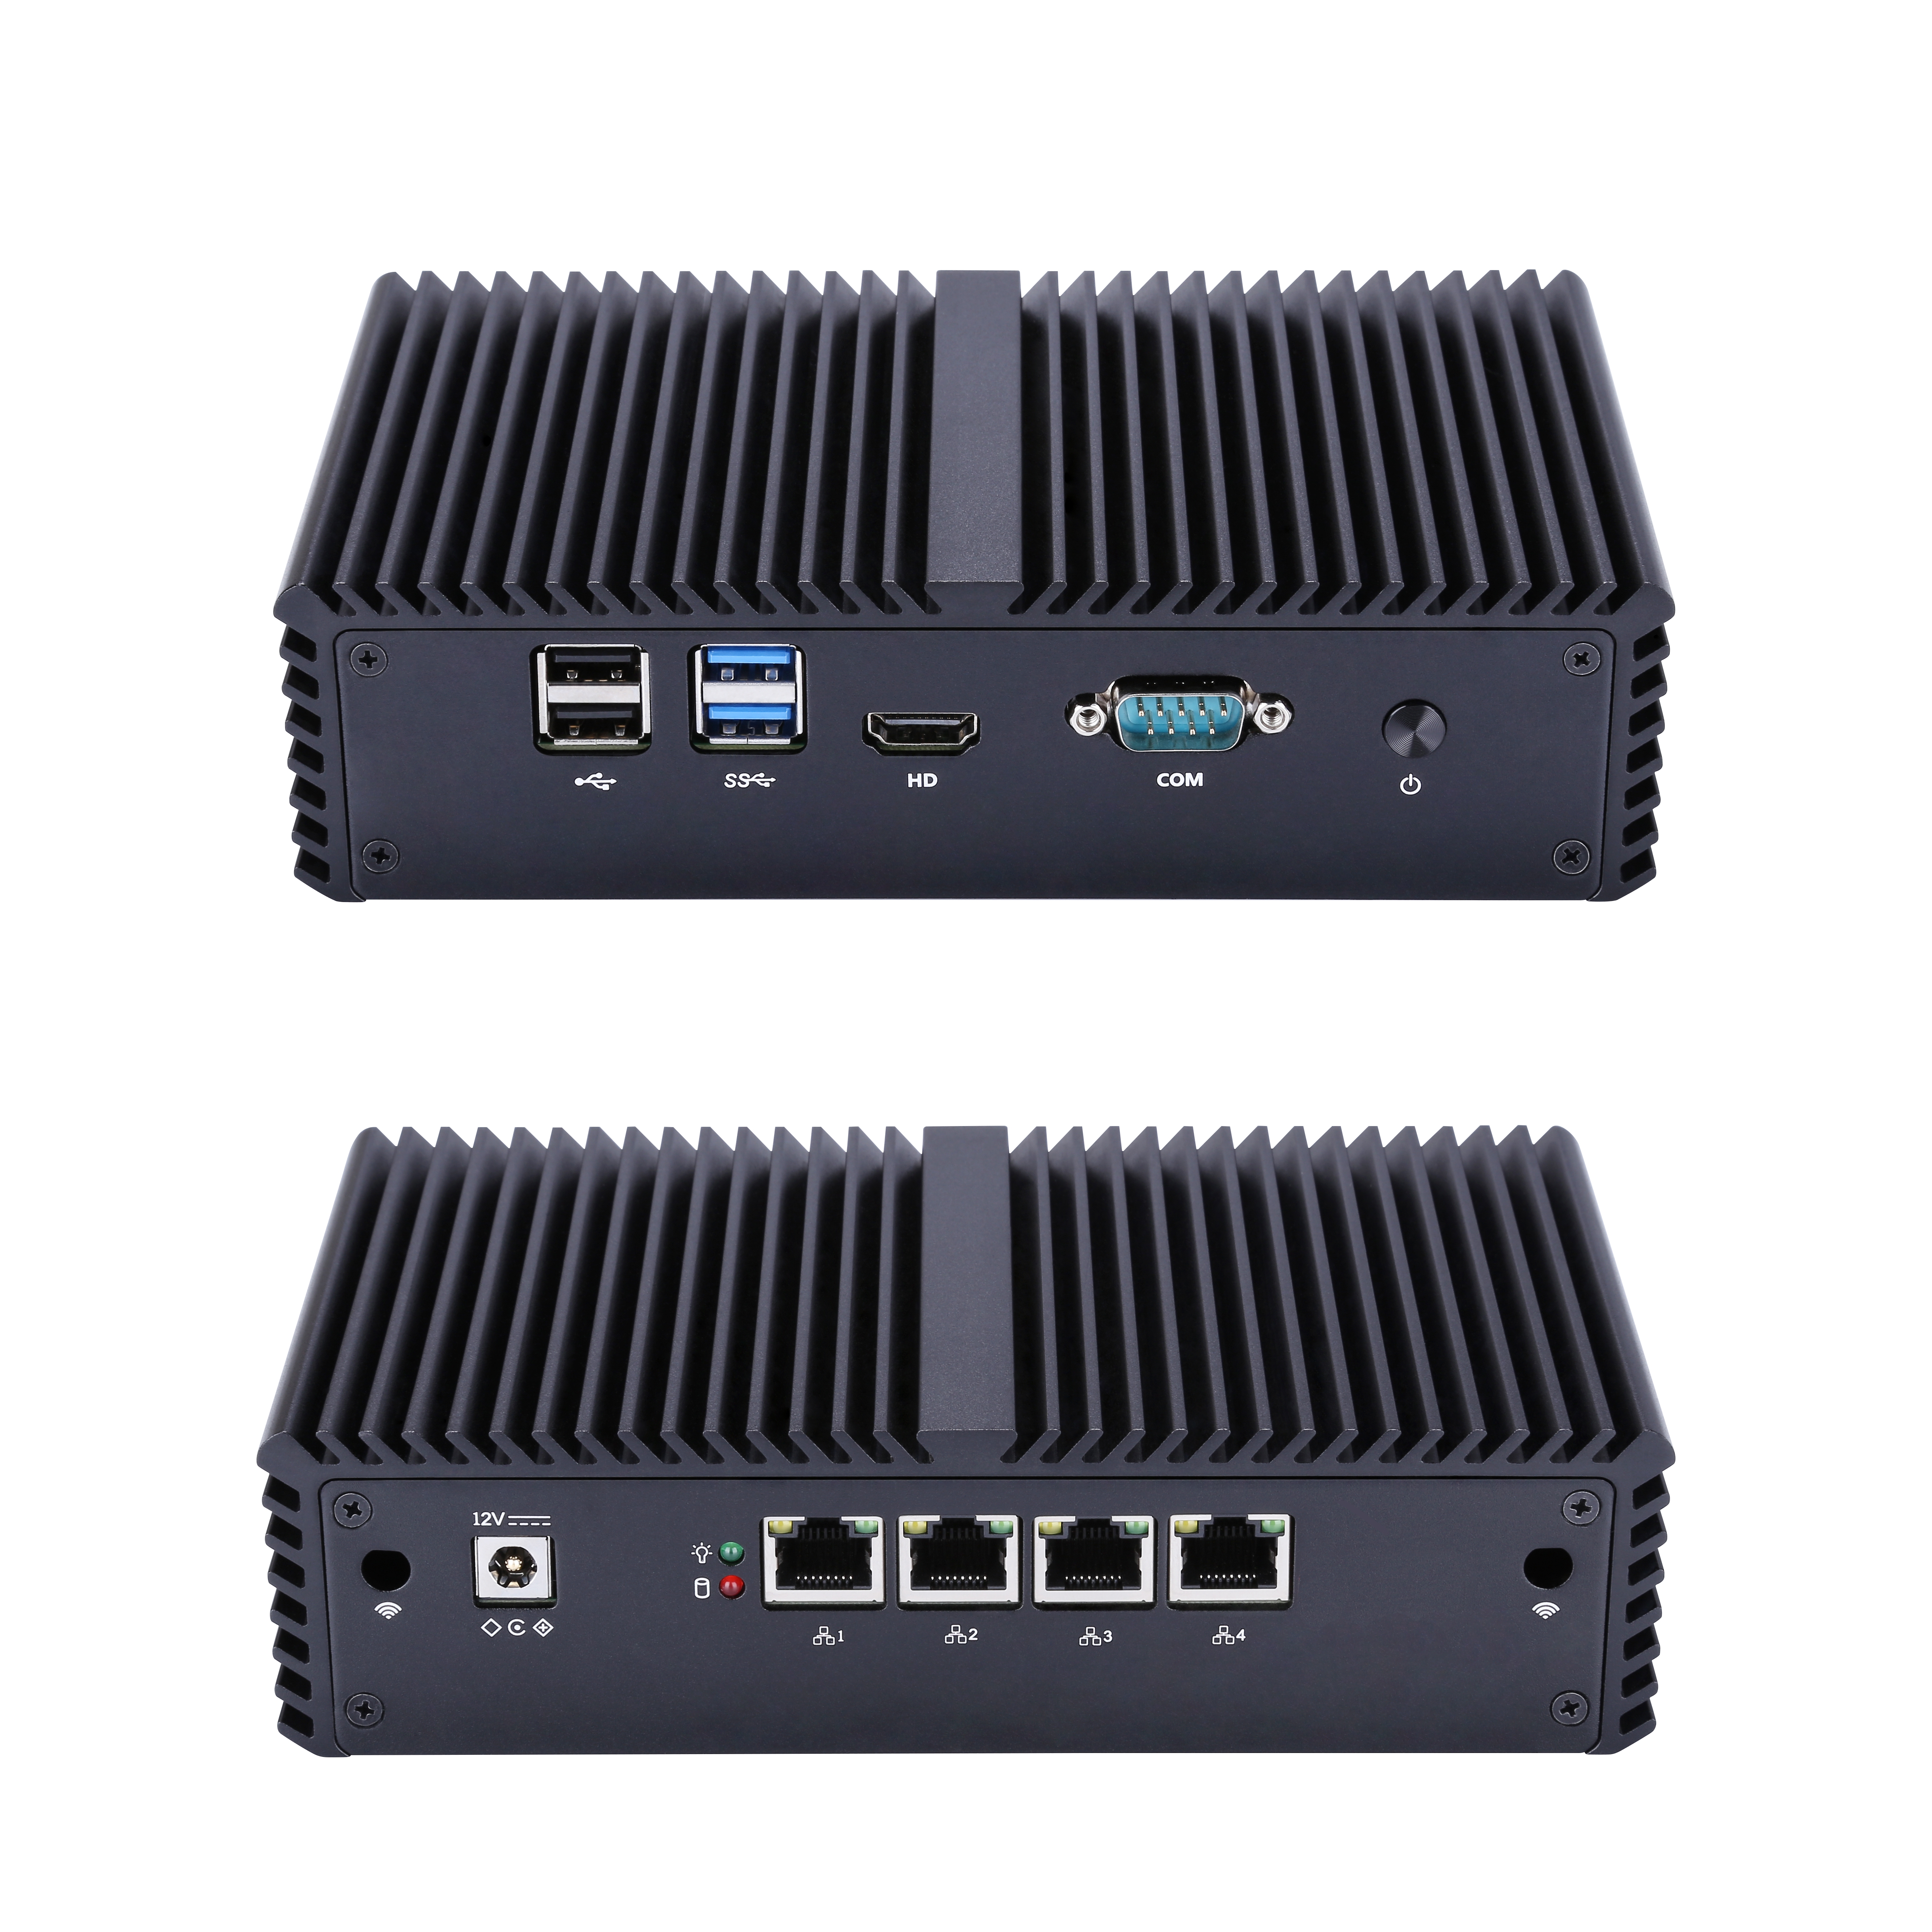 This fanless mini PC has two 2.5 GbE Ethernet ports an up to a